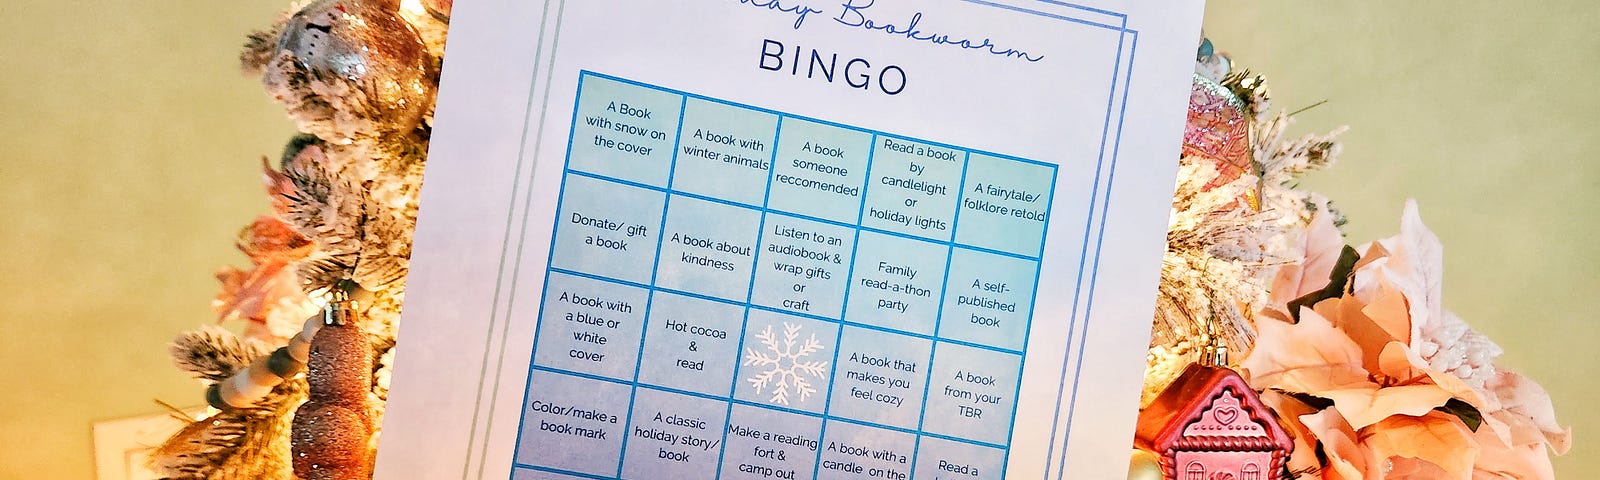 A reading challenge bingo sheet is held in front of a lit Christmas tree.